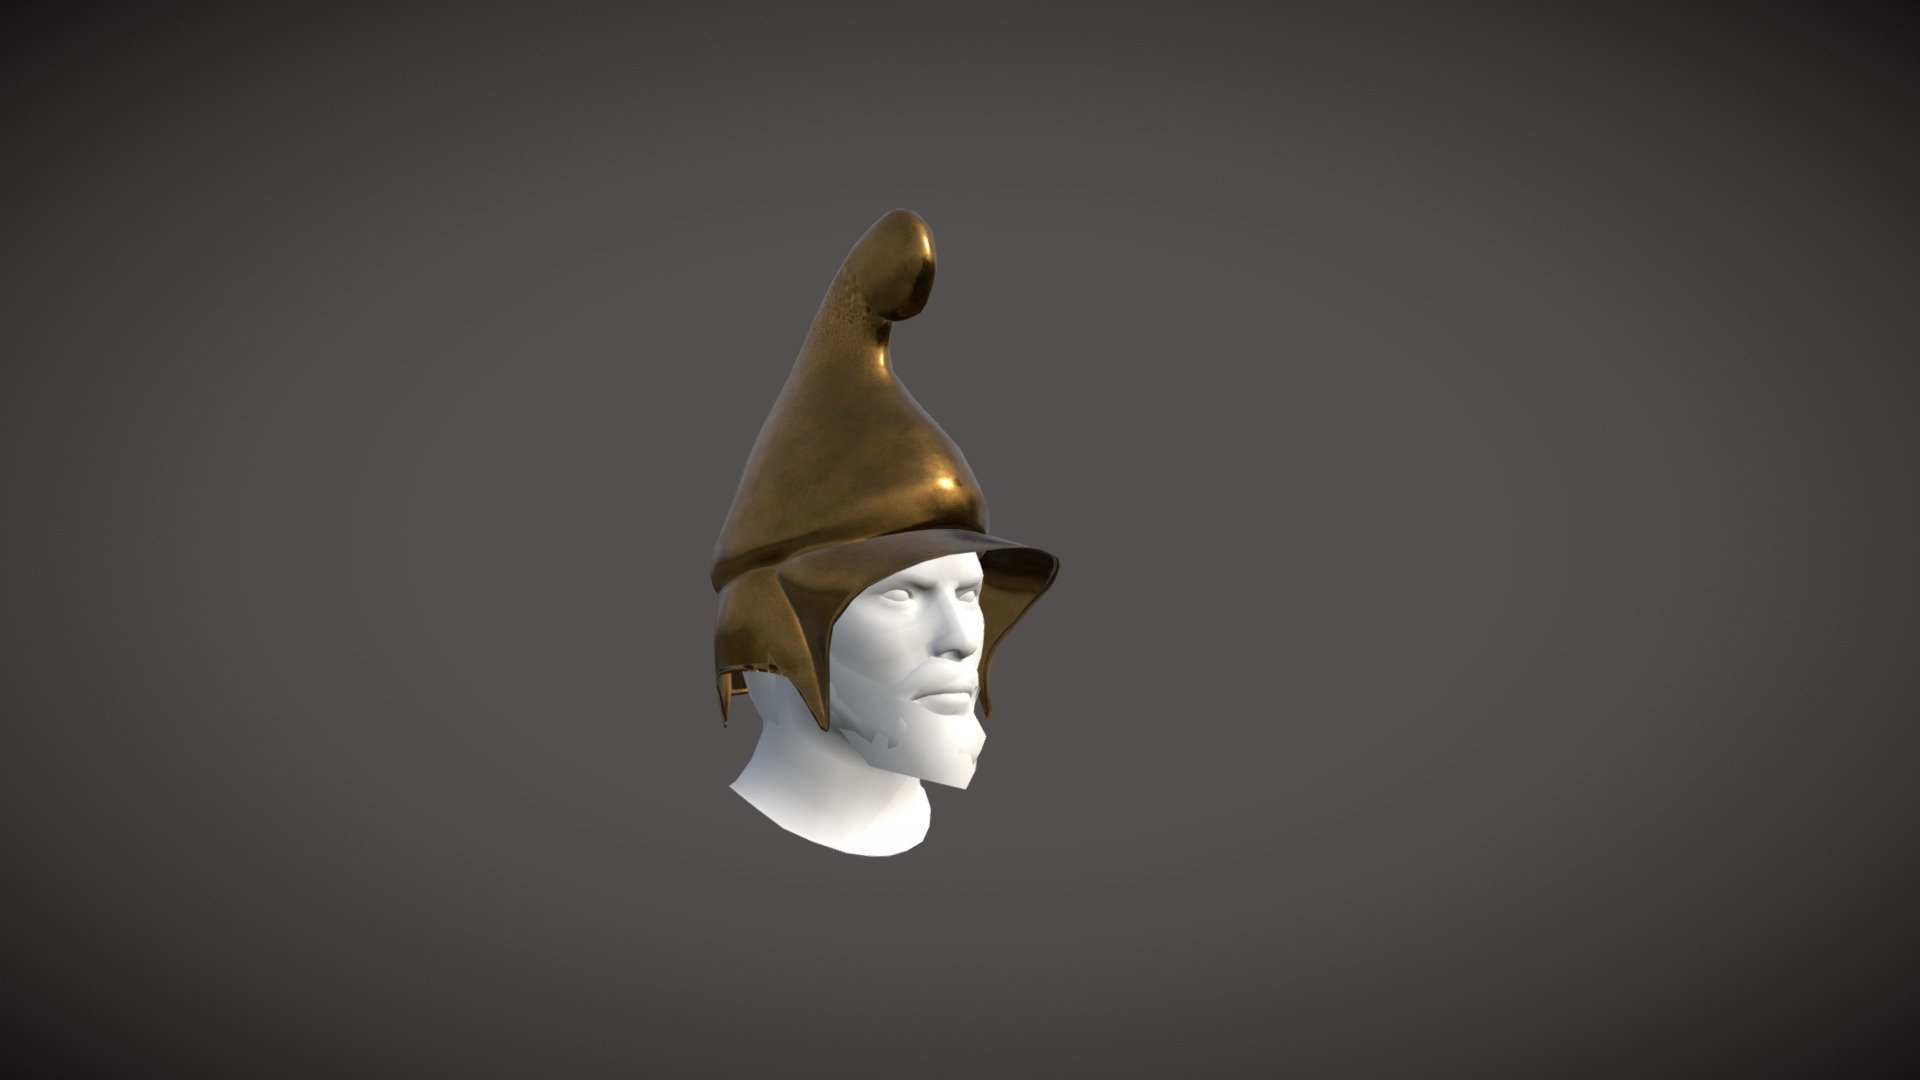 A Phrygian-boetian type helmet, where one can see the expanded curves around the rim typical of the Boetian, and the elongated crest of the Phrygian helmet.

Made for the RIR: Imperium Surrectum mod, for the game Rome Total War Remastered.

Made in Blender - 896 vertices

The making of such helmets consists of modelling the low-poly version, followed by making a high poly version through the use of the Multi-Res modifier. Any details that the piece might present are sculpted on this copy, after which, they are baked into its low poly counterpart.
The goal here is to avoid modelling the additional detail - which would increase the vert count - while still maintaining the illusion that the helmet contains such details 3d model